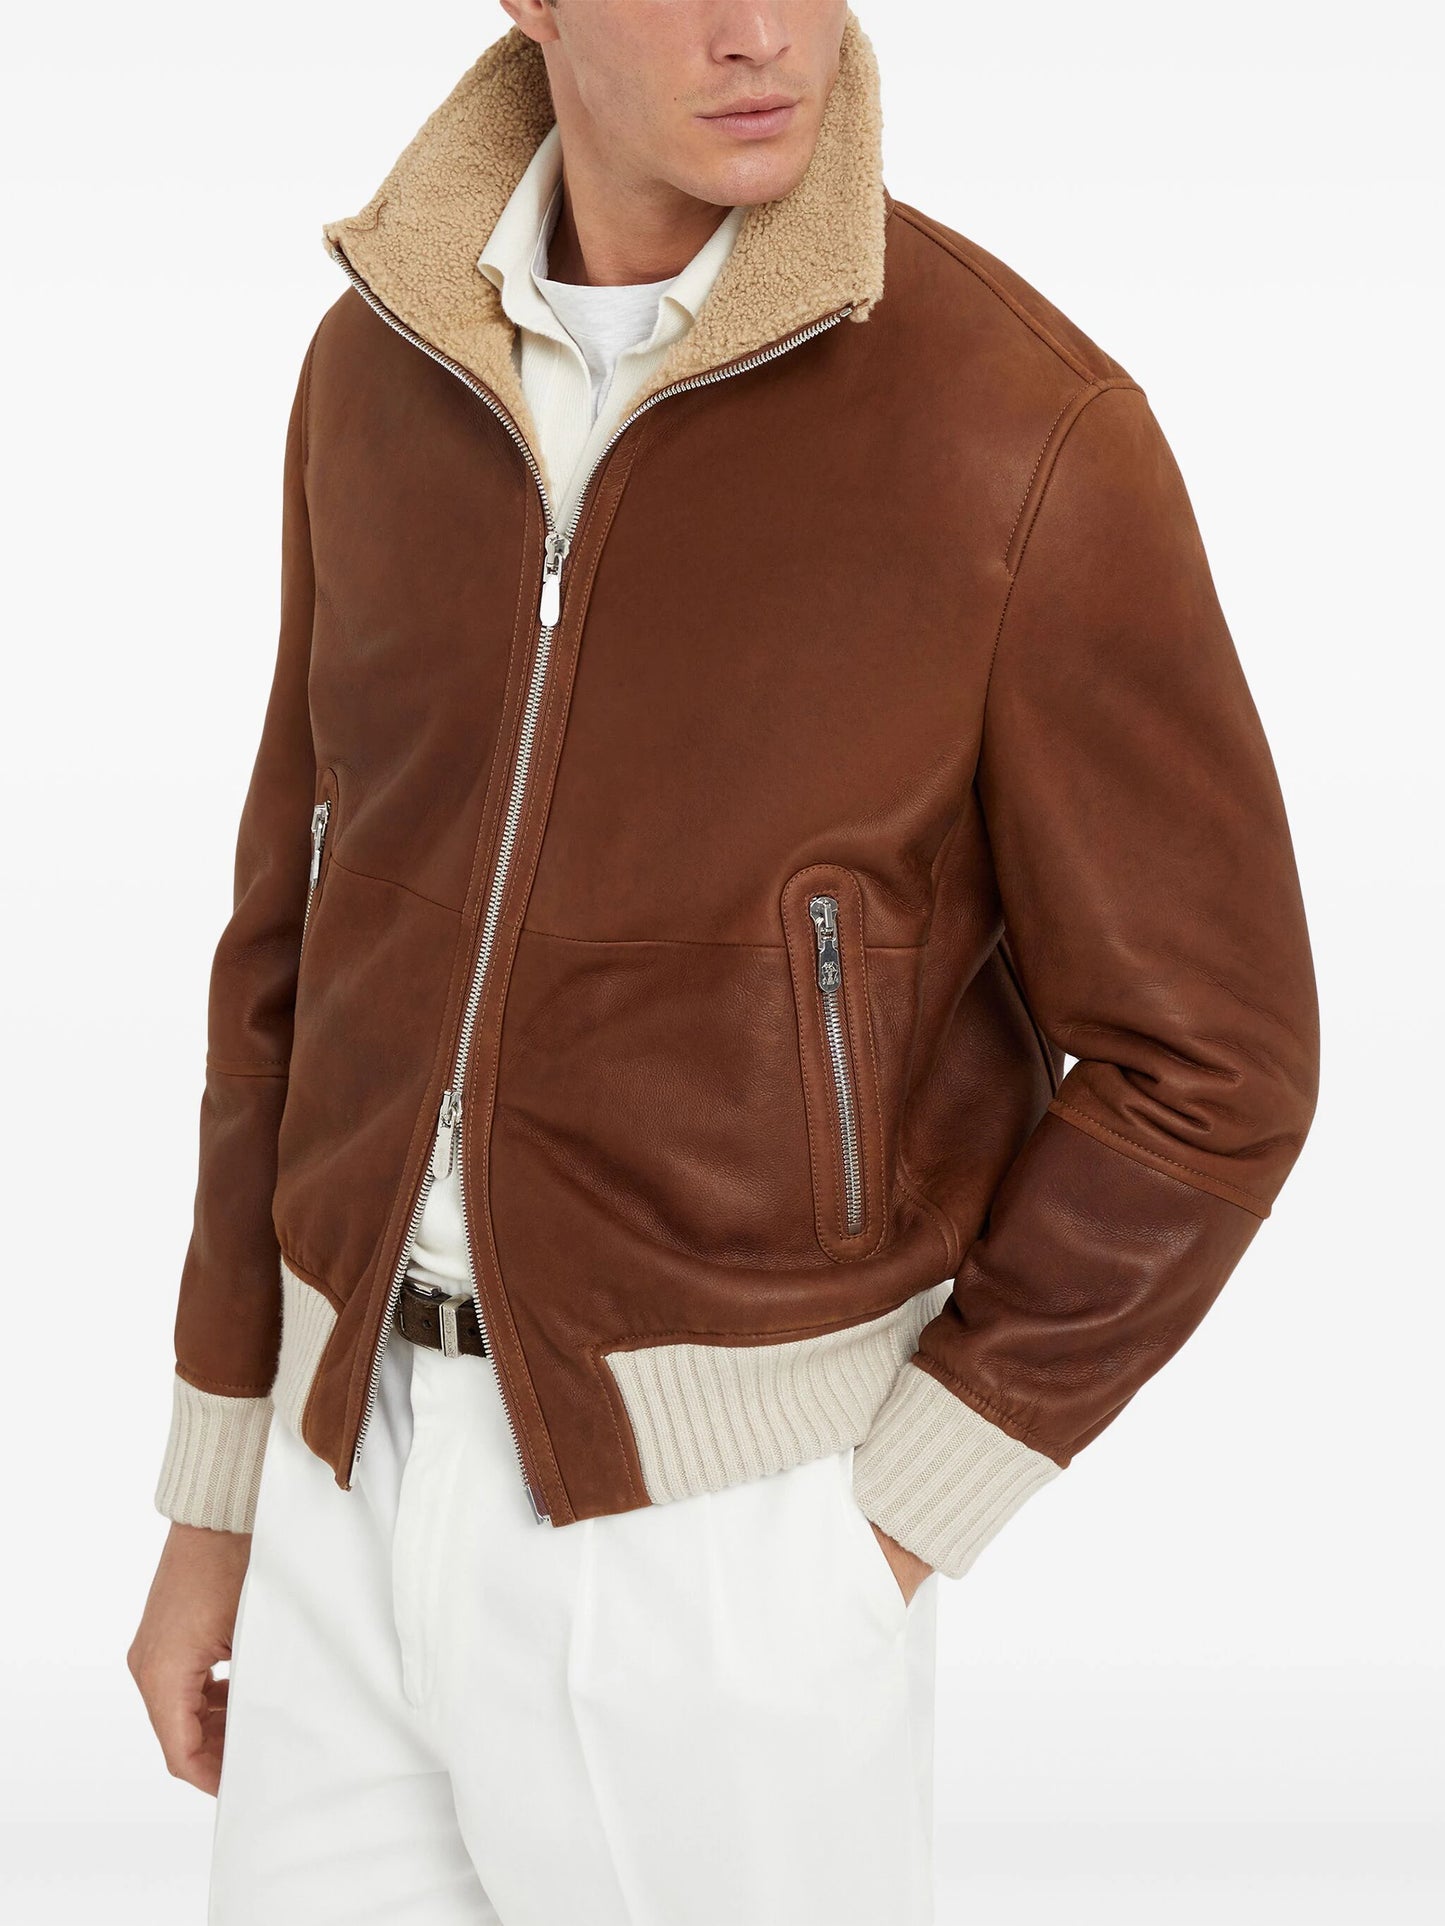 BROWN CUFFED LEATHER JACKET